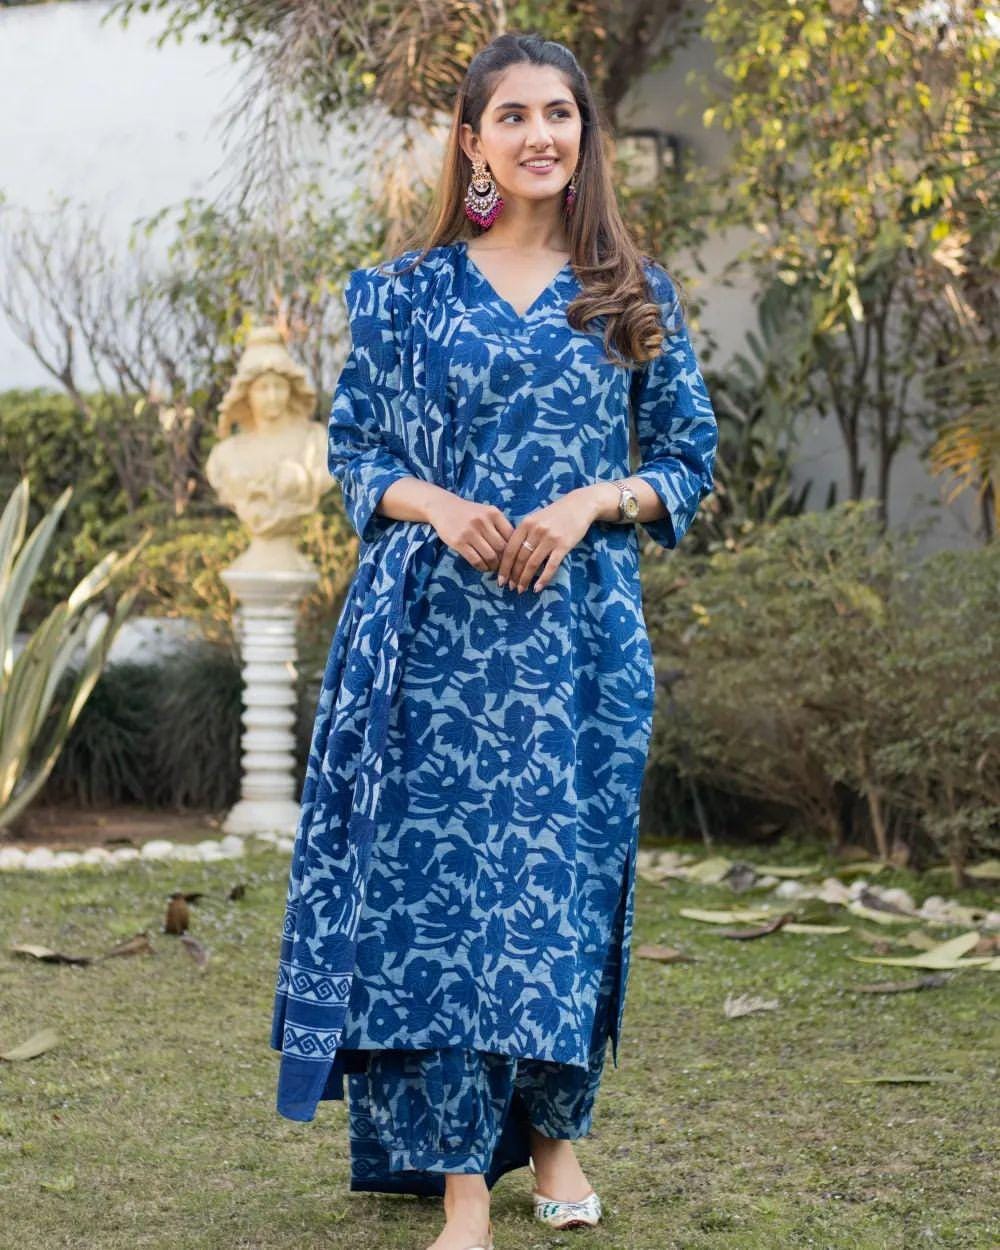 Shop the Latest Trends: Cotton Kurtis for Women Online - Luxehome - Medium